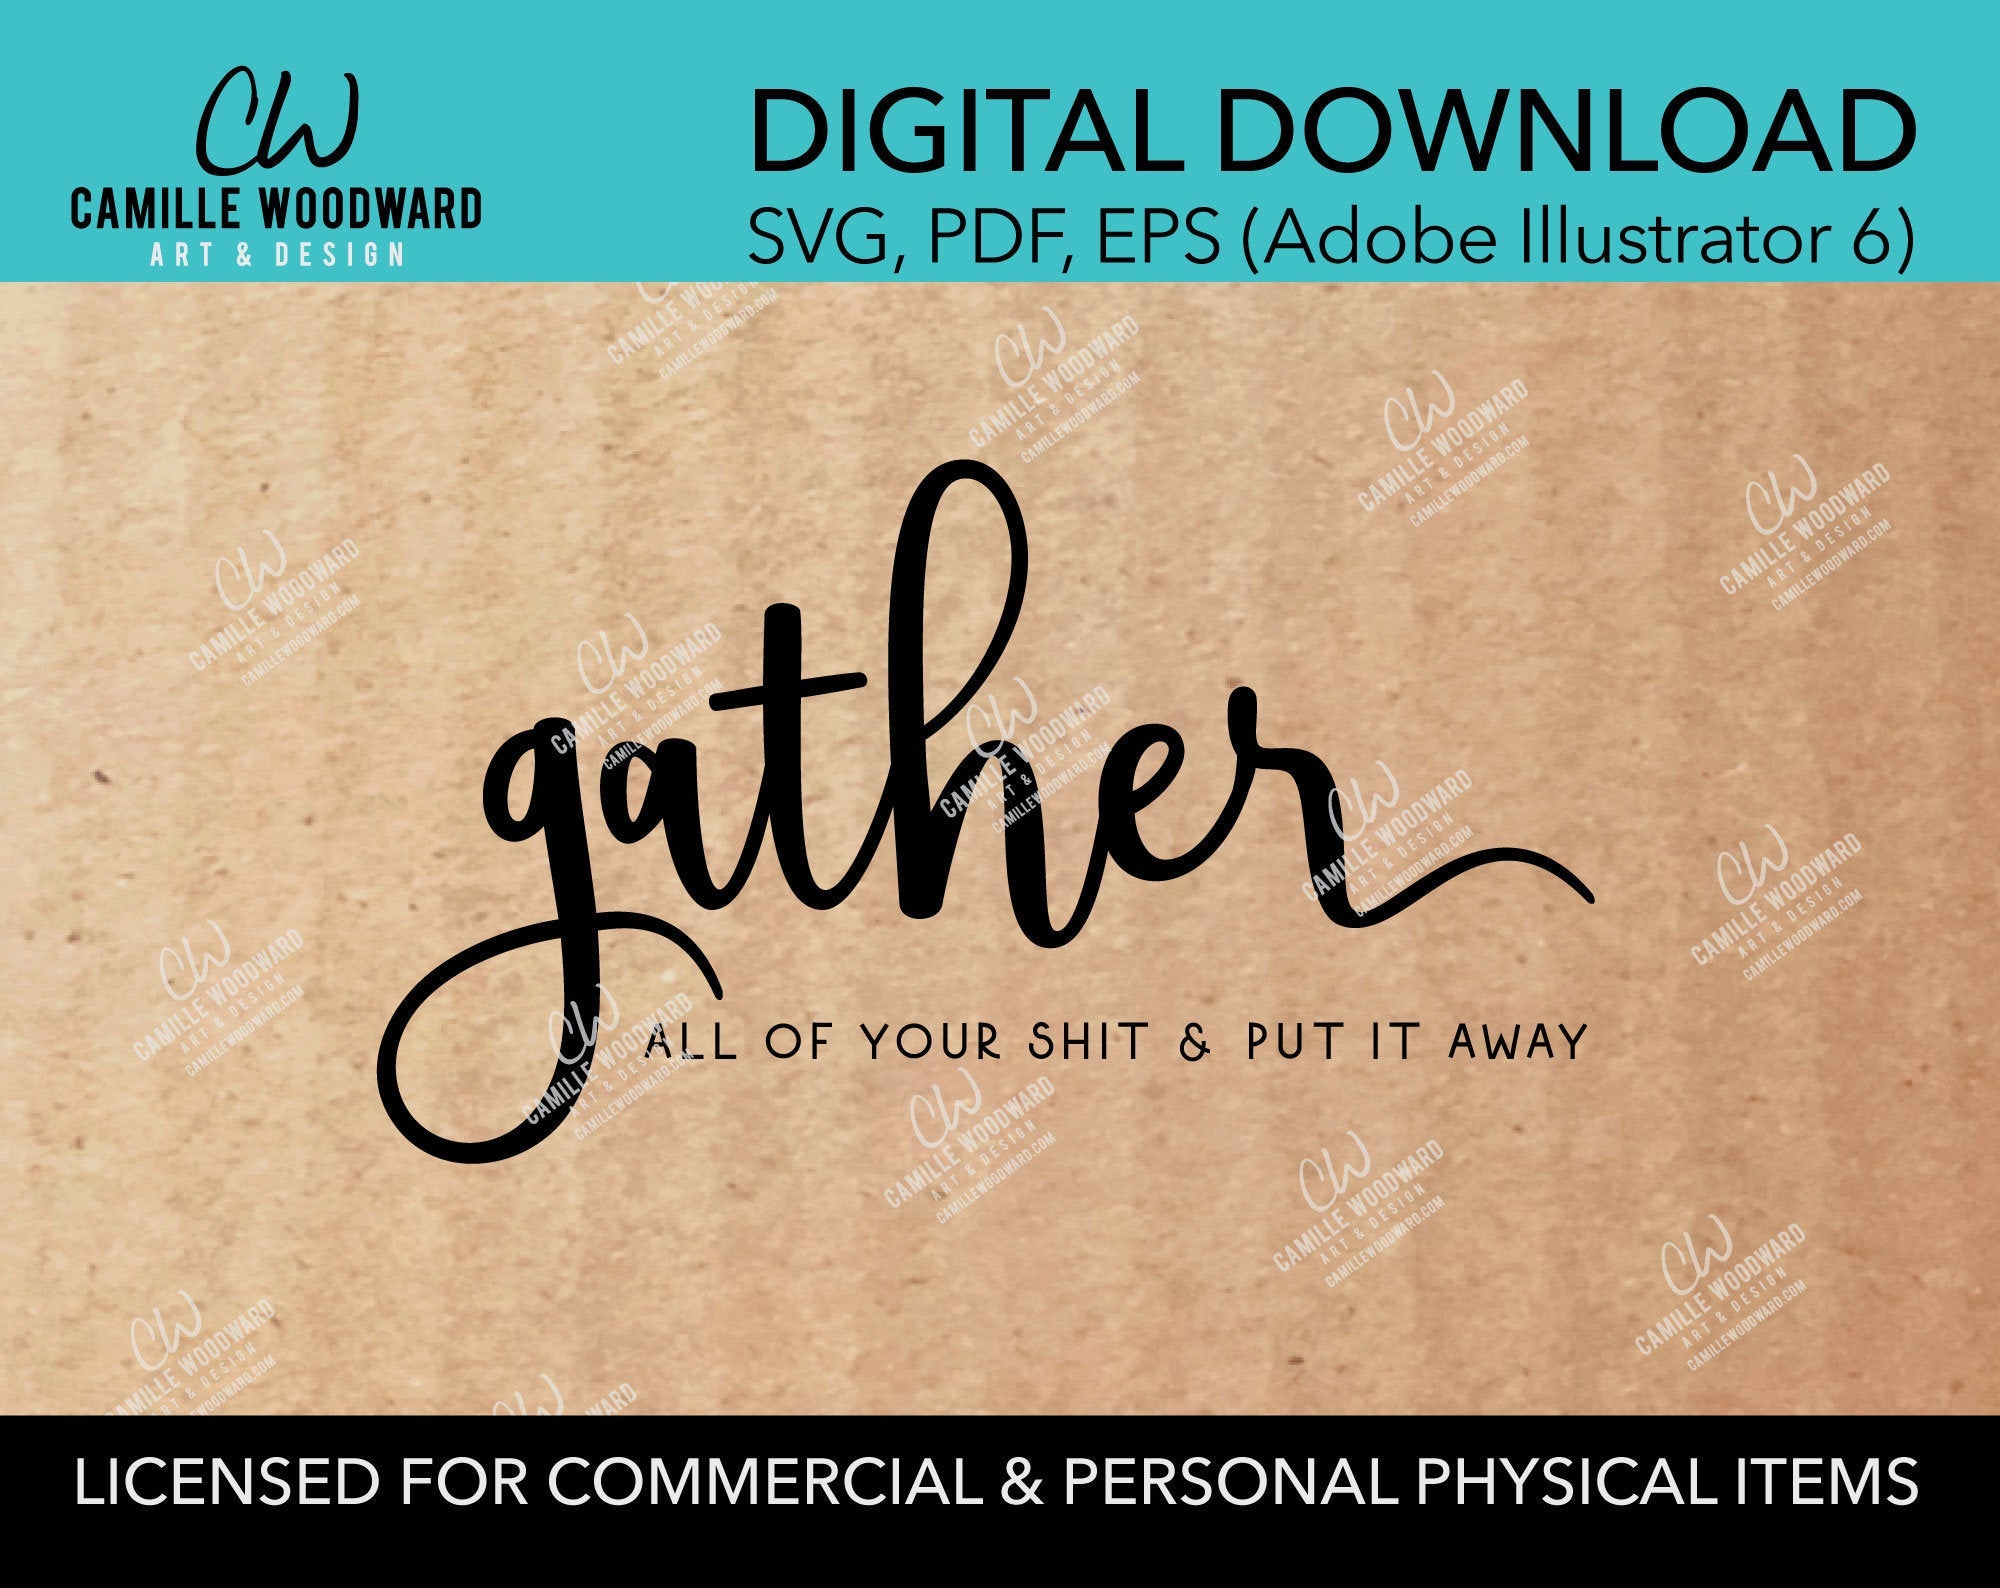 Gather All Of Your Shit & Put It Away, SVG - INSTANT Digital Download